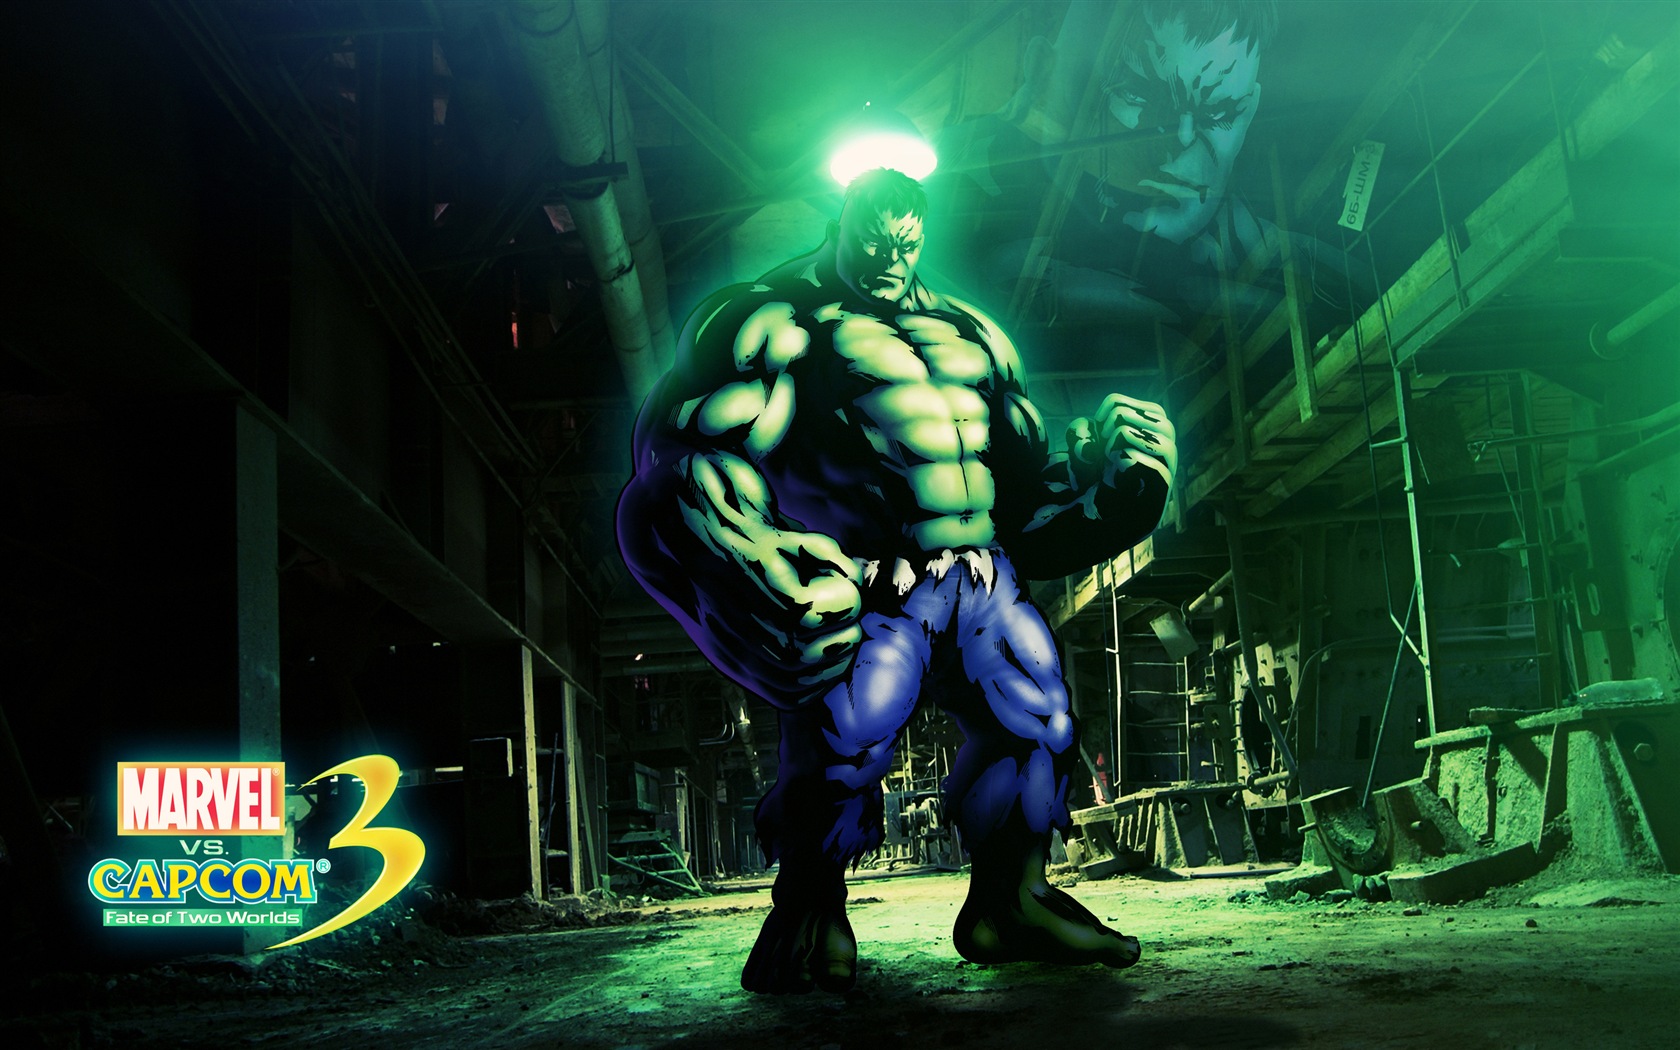 Marvel VS. Capcom 3: Fate of Two Worlds HD game wallpapers #11 - 1680x1050